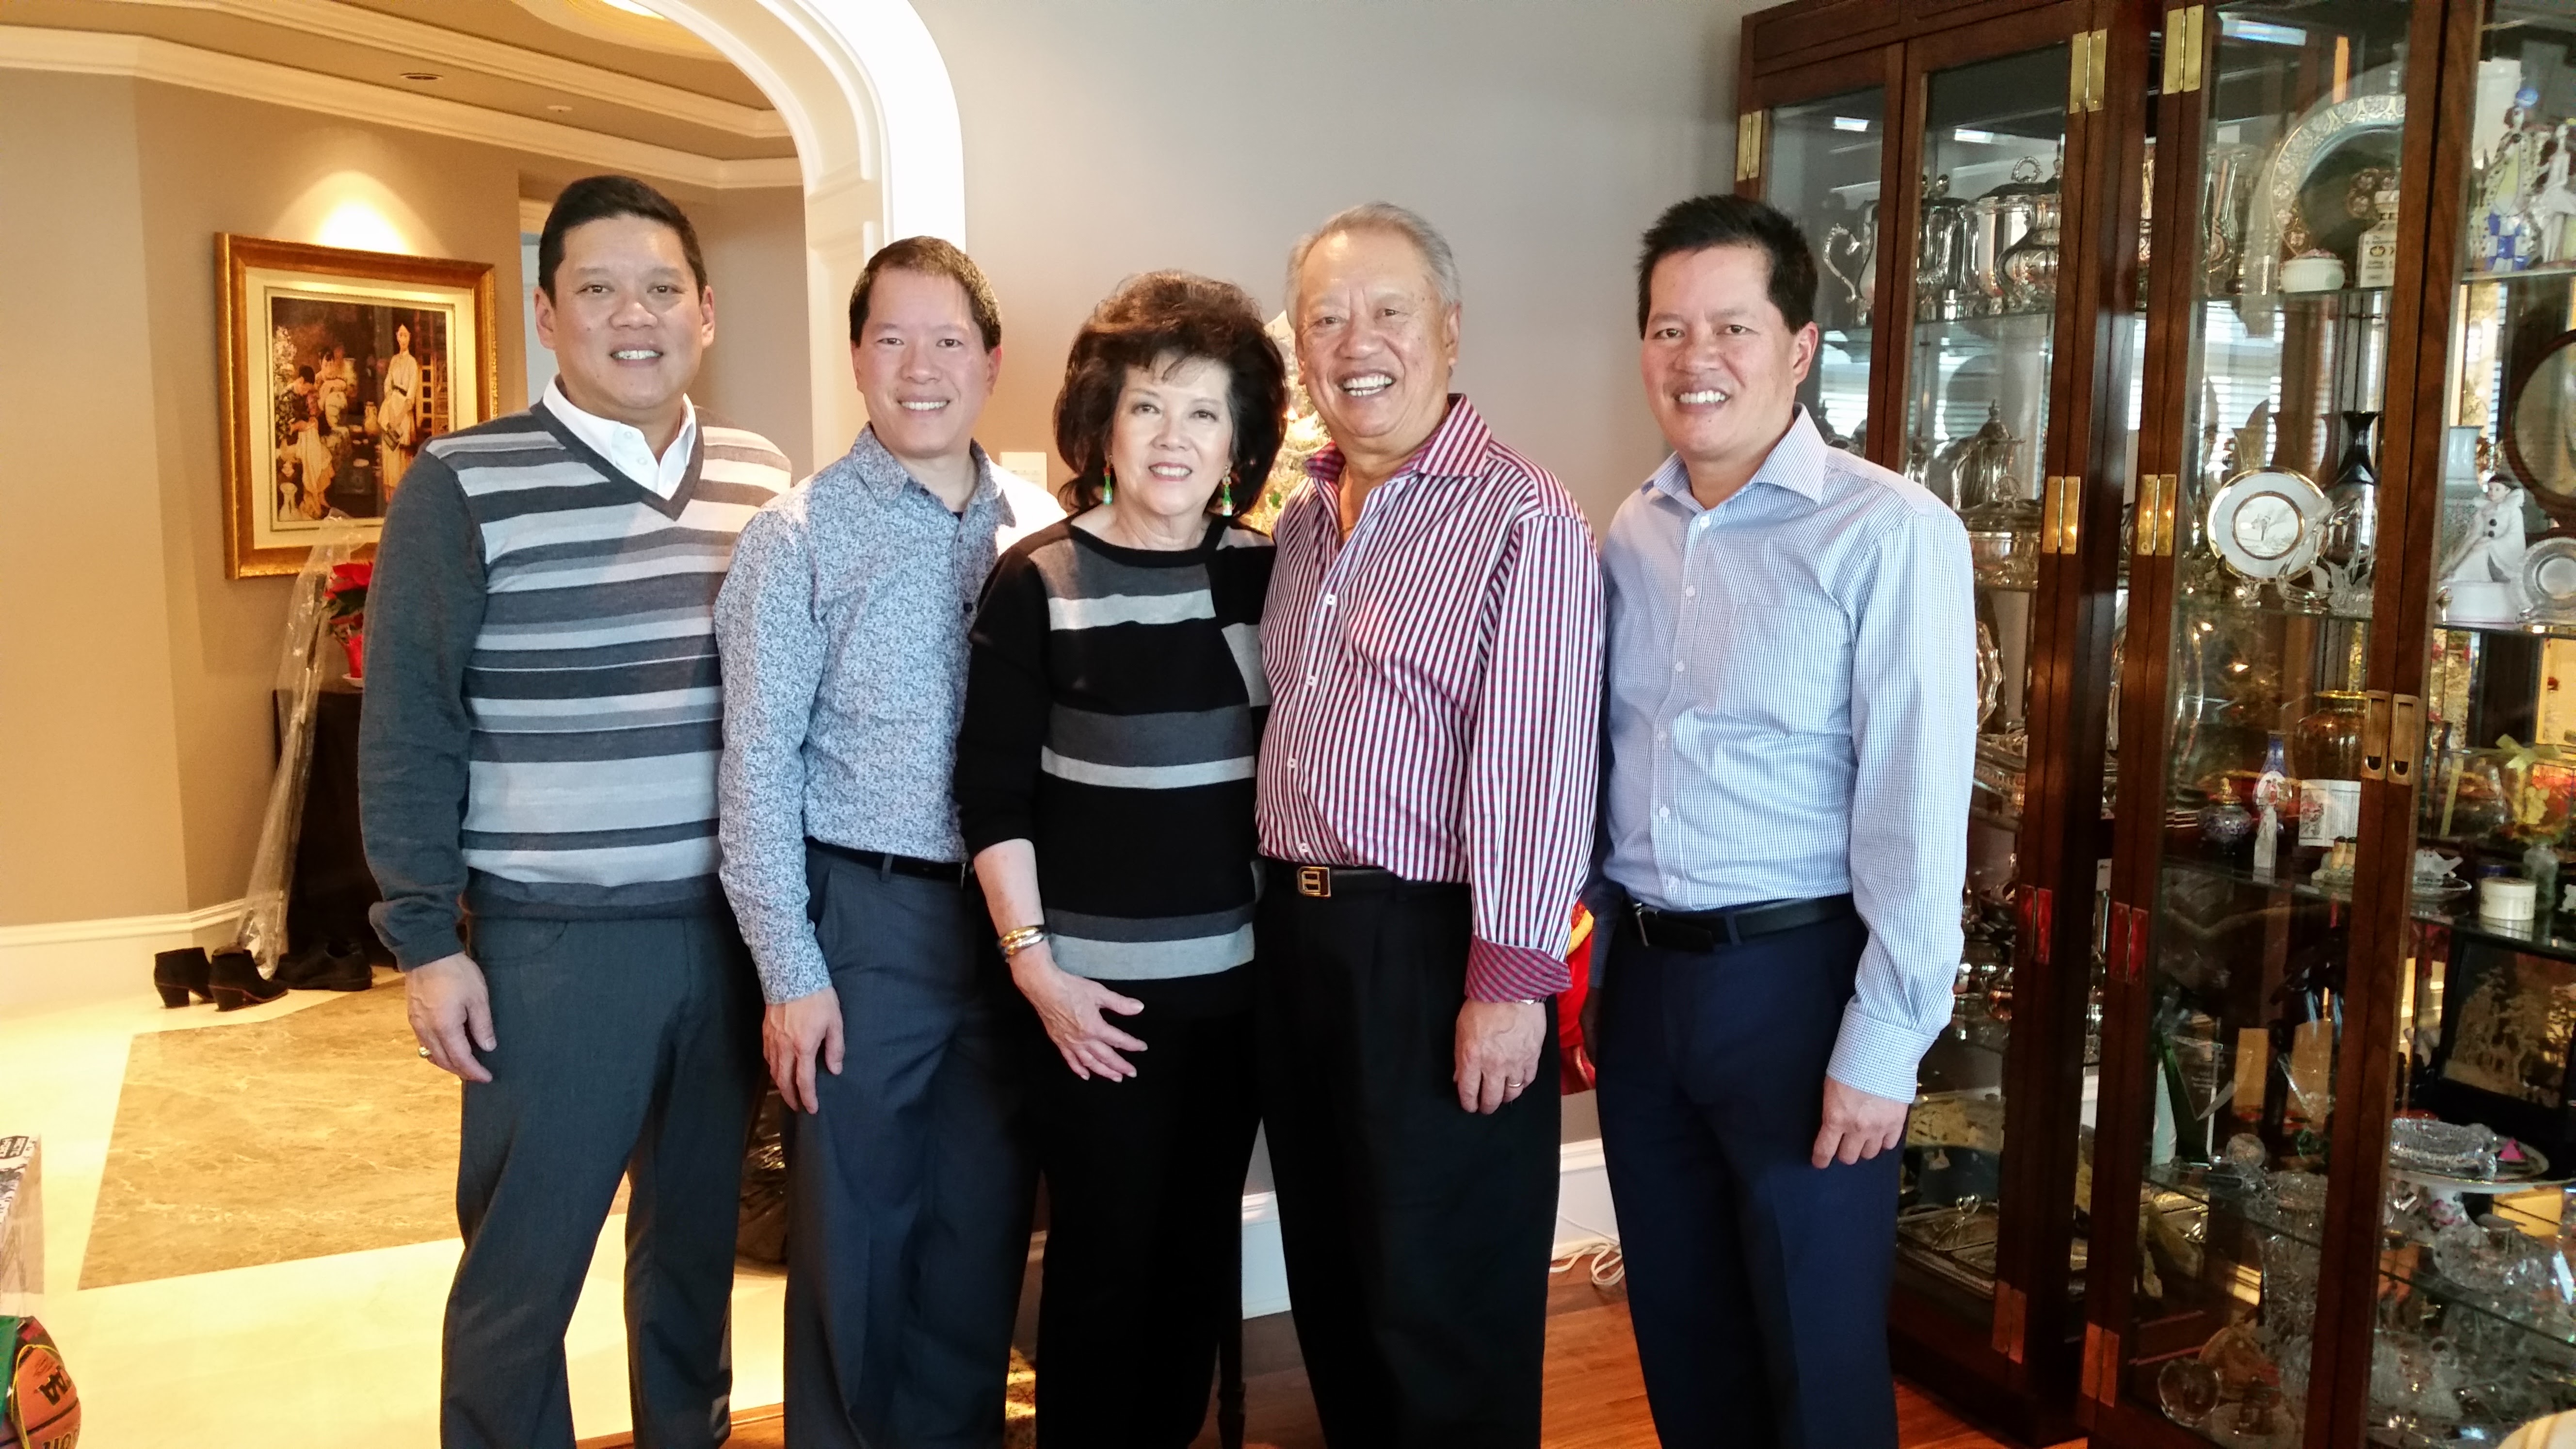 The Yen brothers with their parents, Sue and George. After graduation, Greg and Brad went on to become Chartered Professional Accountants while Vincent pursued a career in commercial real estate, eventually joining his father in the family business. 